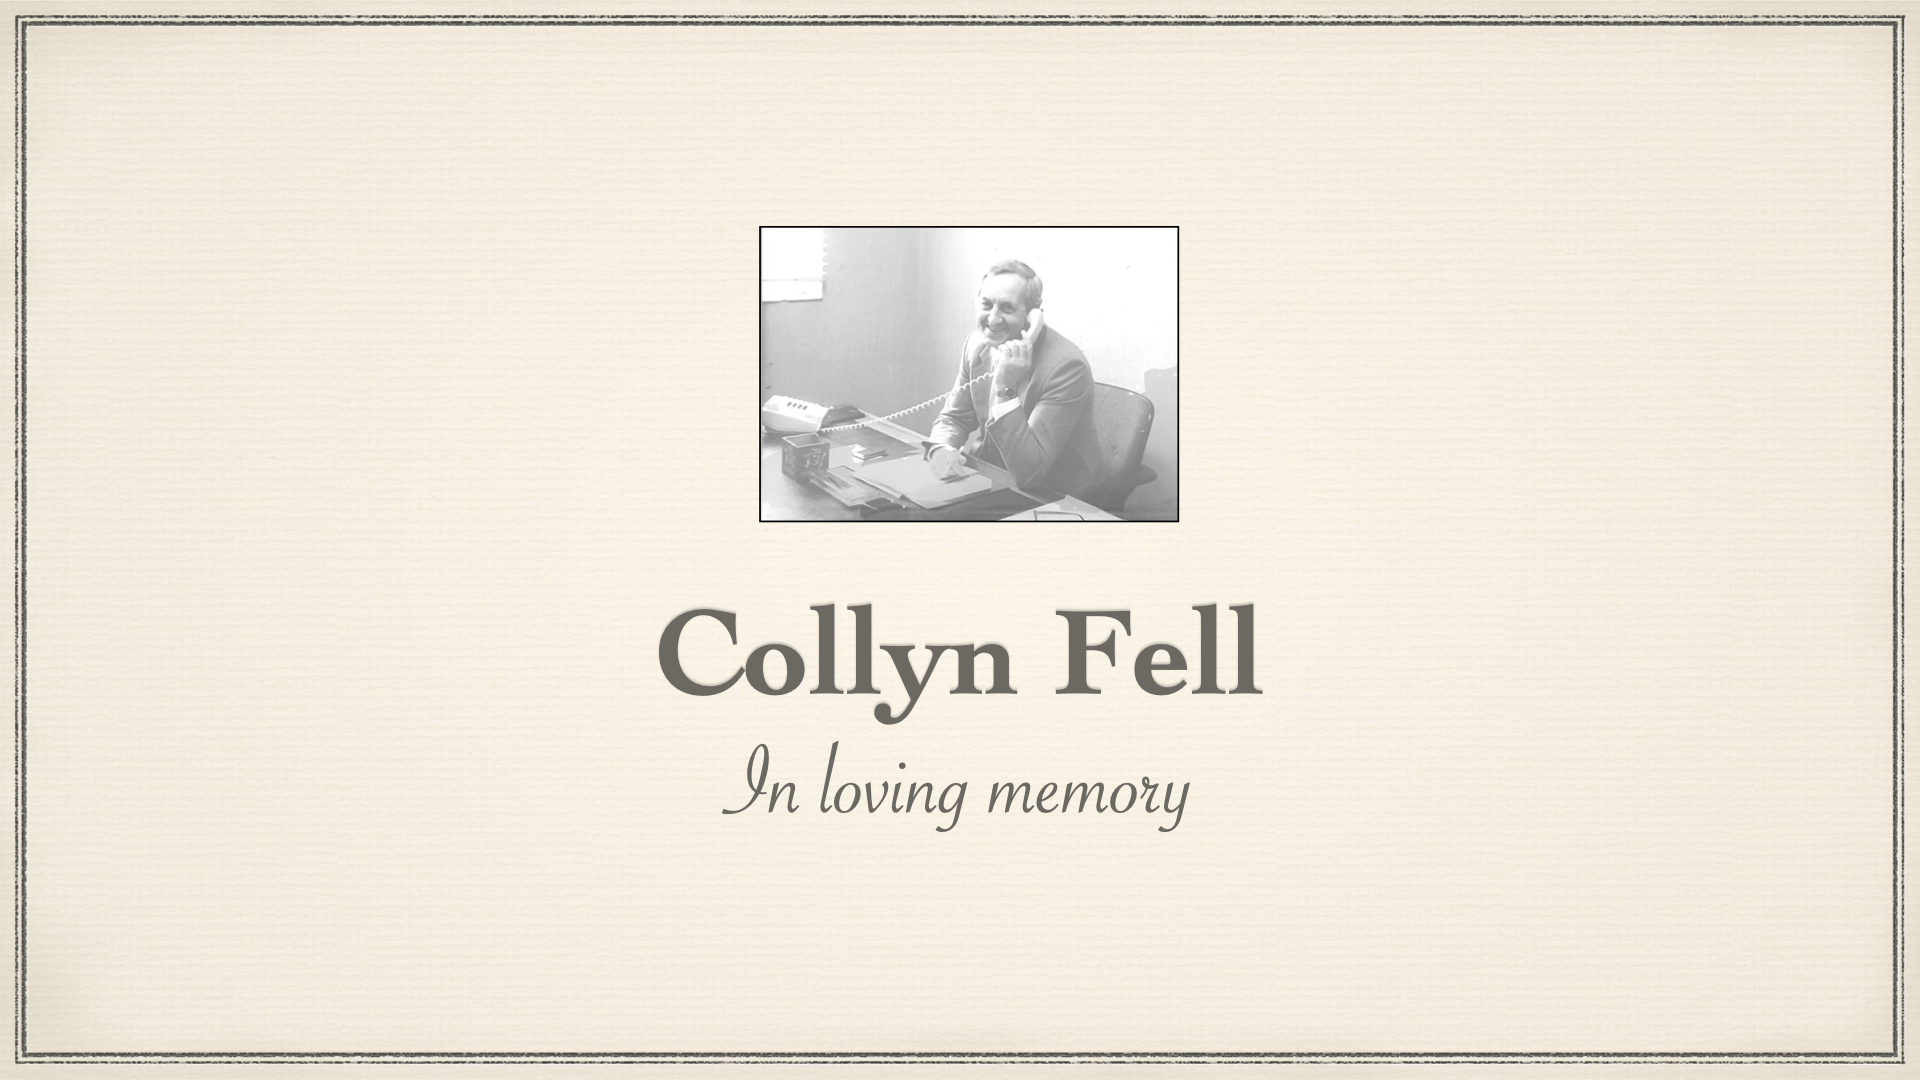 Funeral of Collyn Lakeland Fell – Wednesday 18th October at 11am